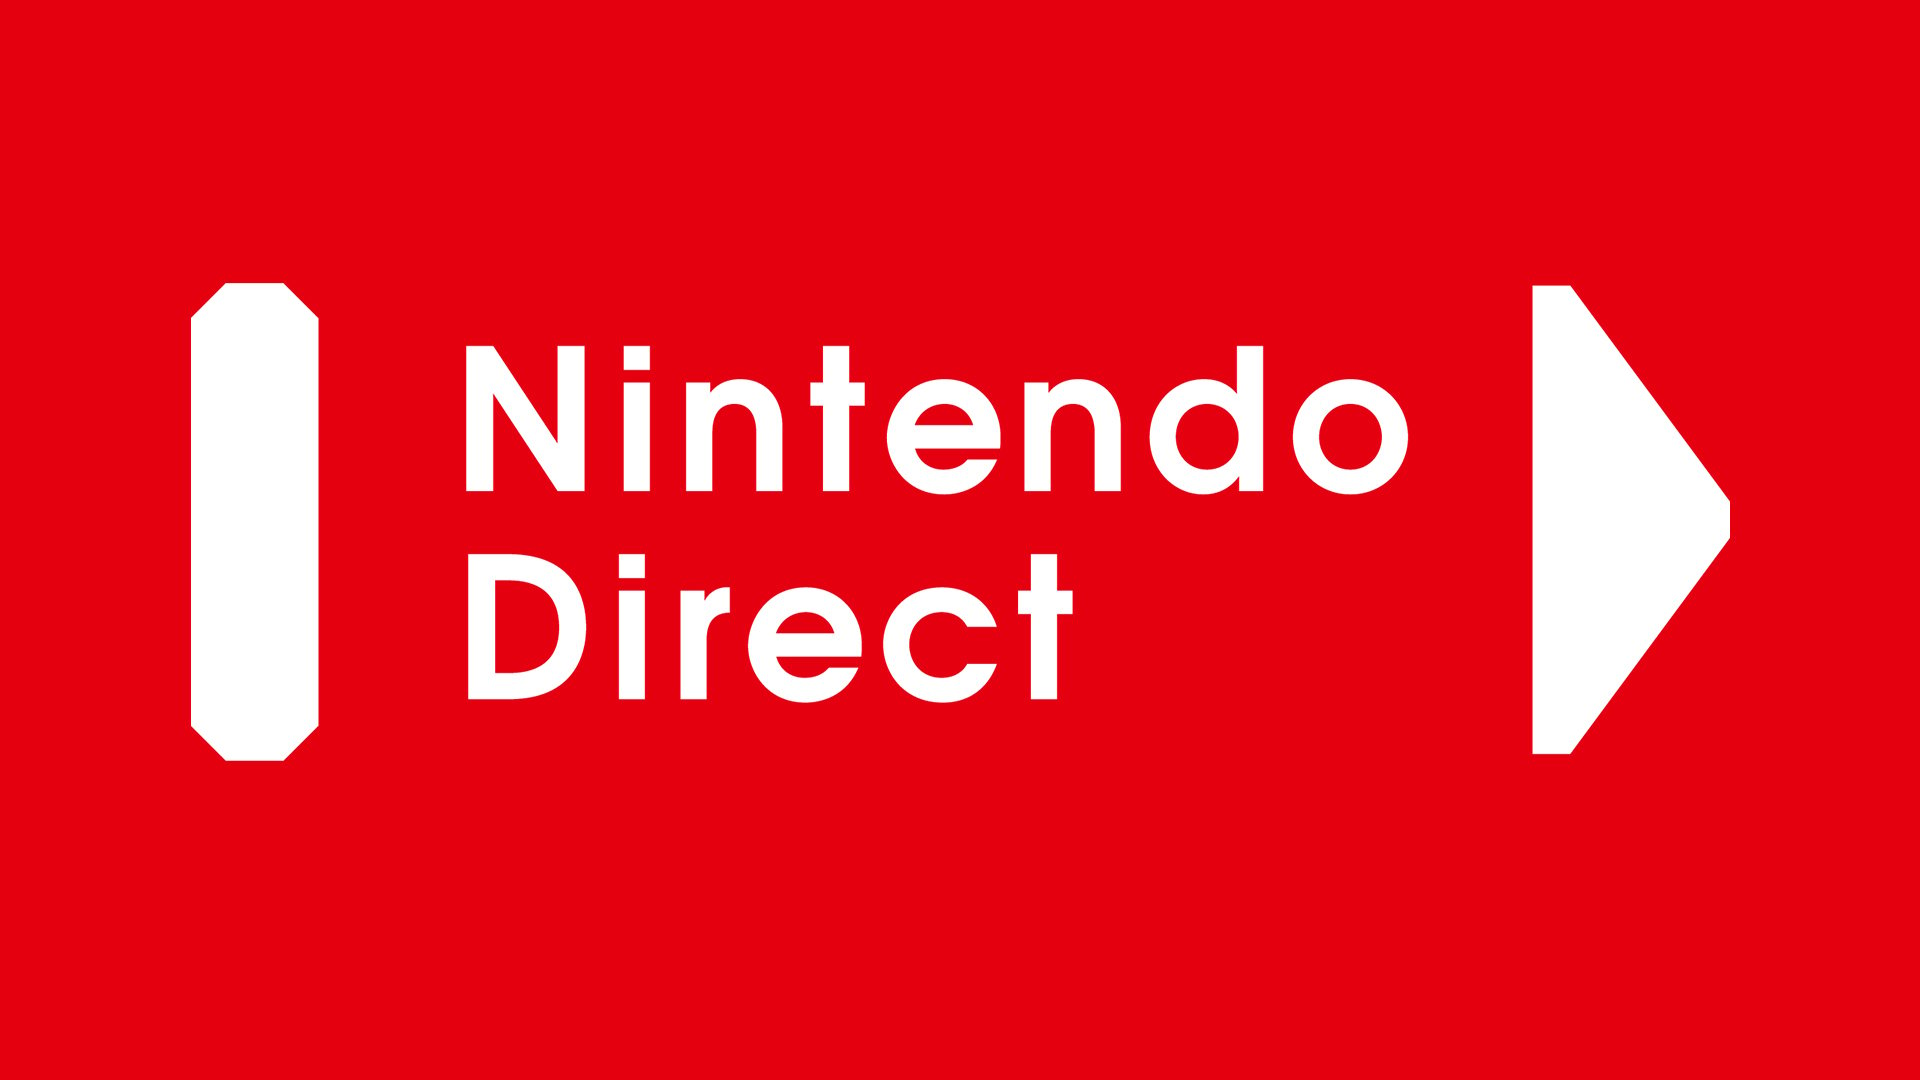 Nedrustning annoncere salvie The Next Nintendo Direct is a Mario Bros. Movie Direct on March 9th